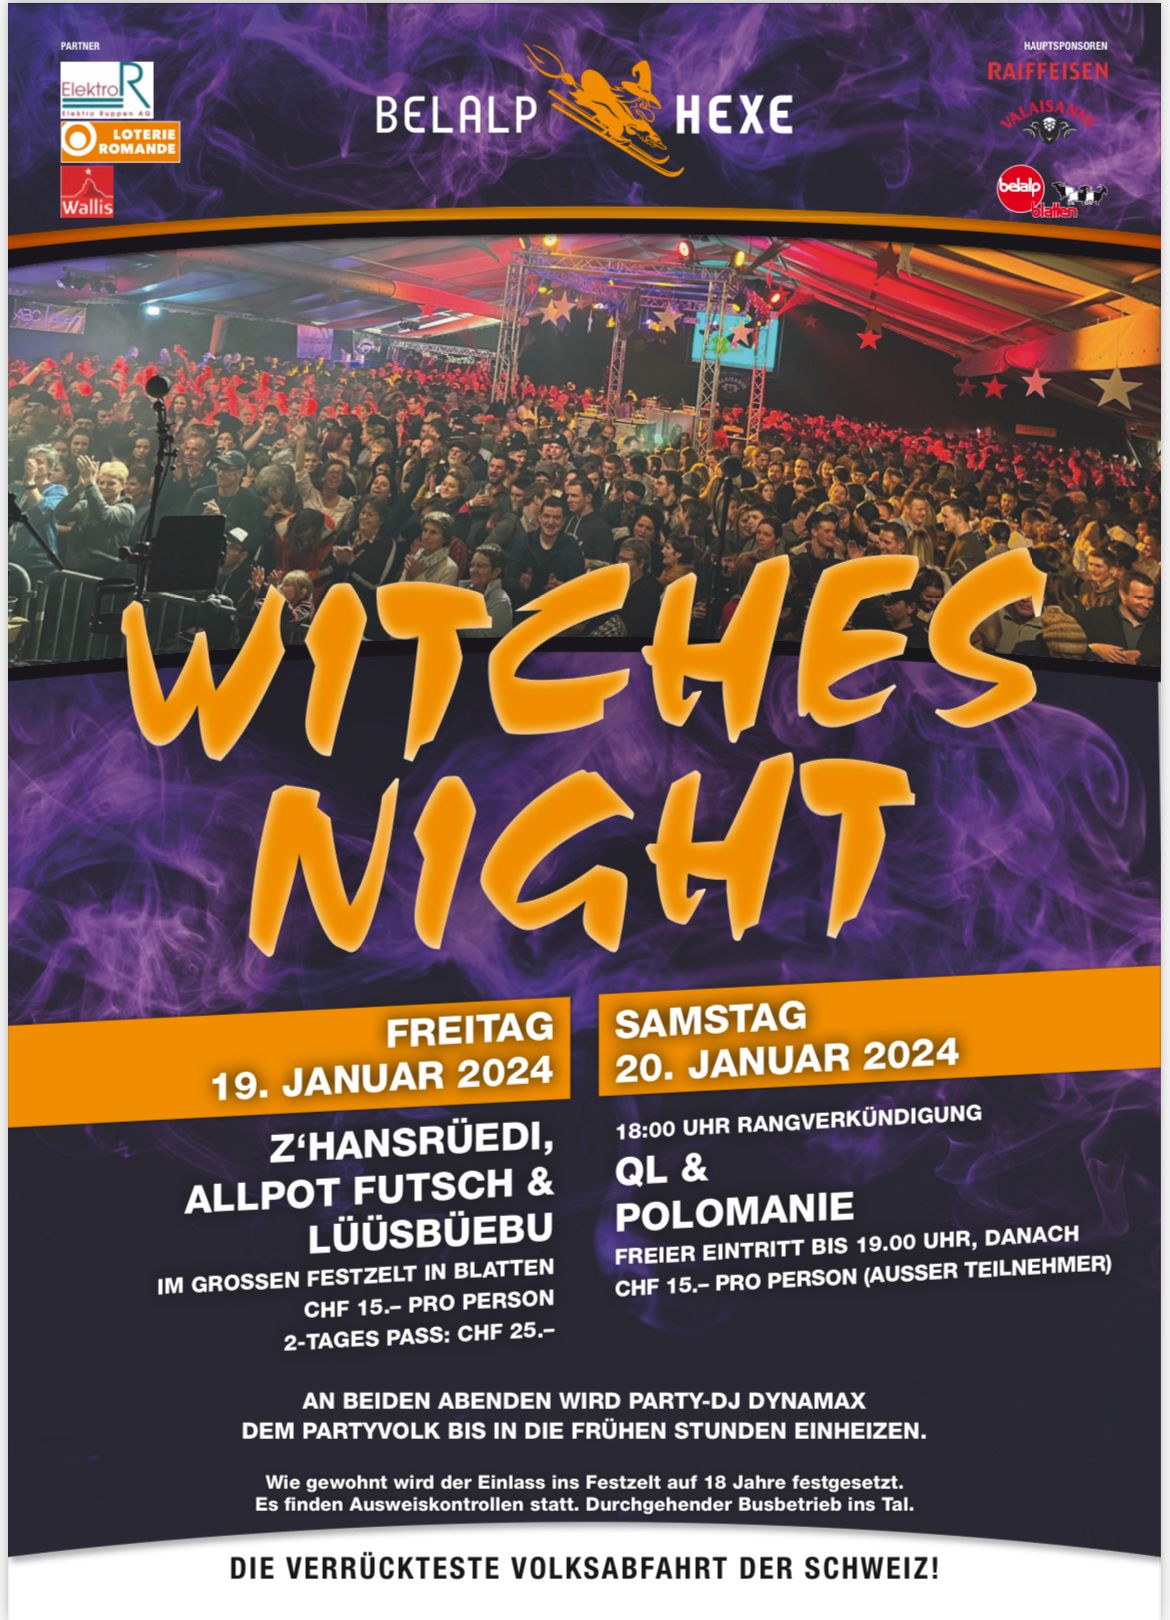 Witches Nigth